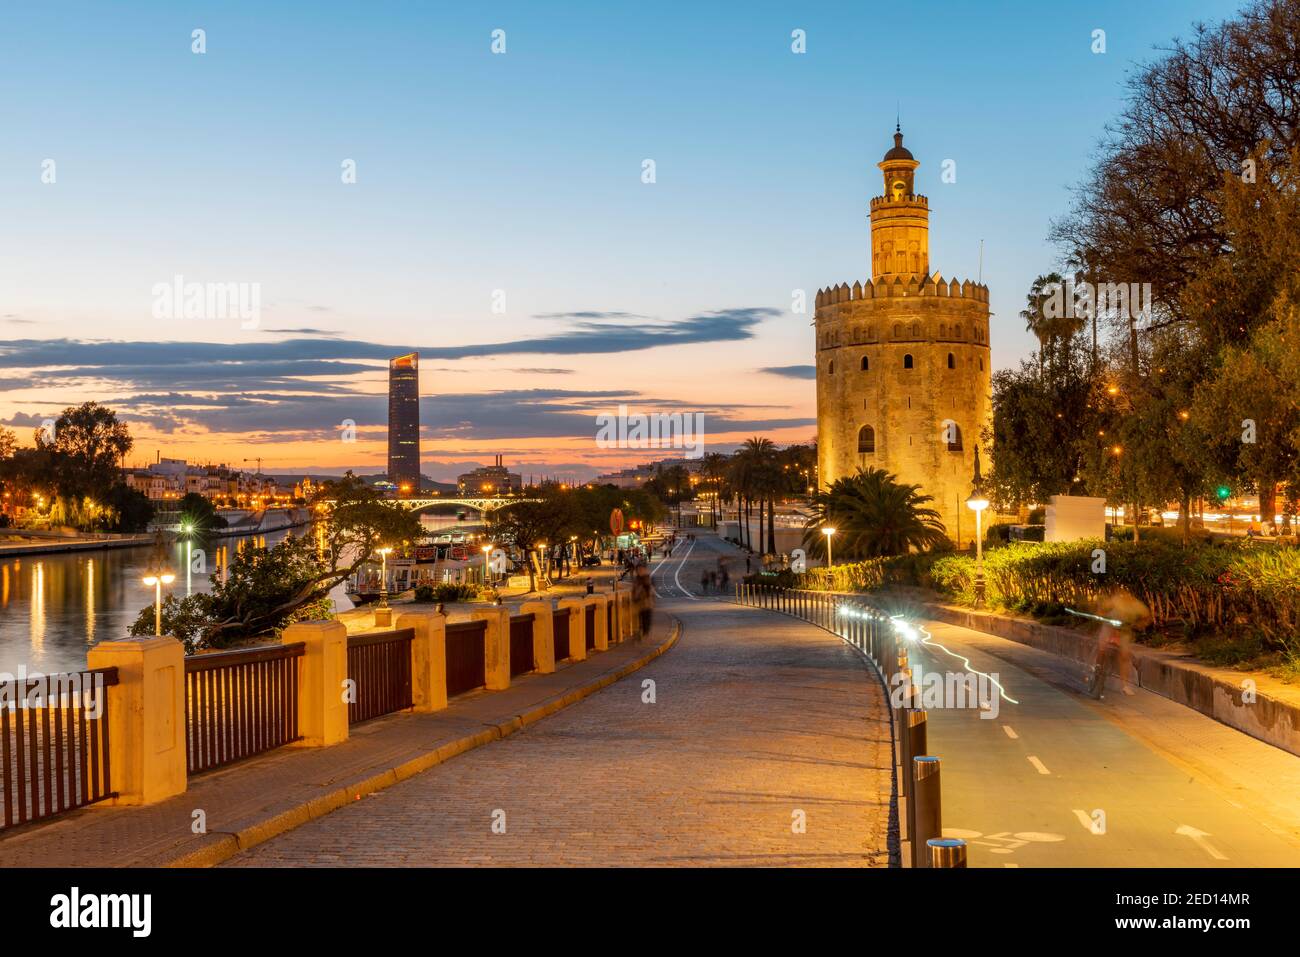 Boardwalk at the river Rio Guadalquivir with illuminated Torre del Oro, in the back Torre Sevilla, sunset, blue hour, Sevilla, Andalusia, Spain Stock Photo